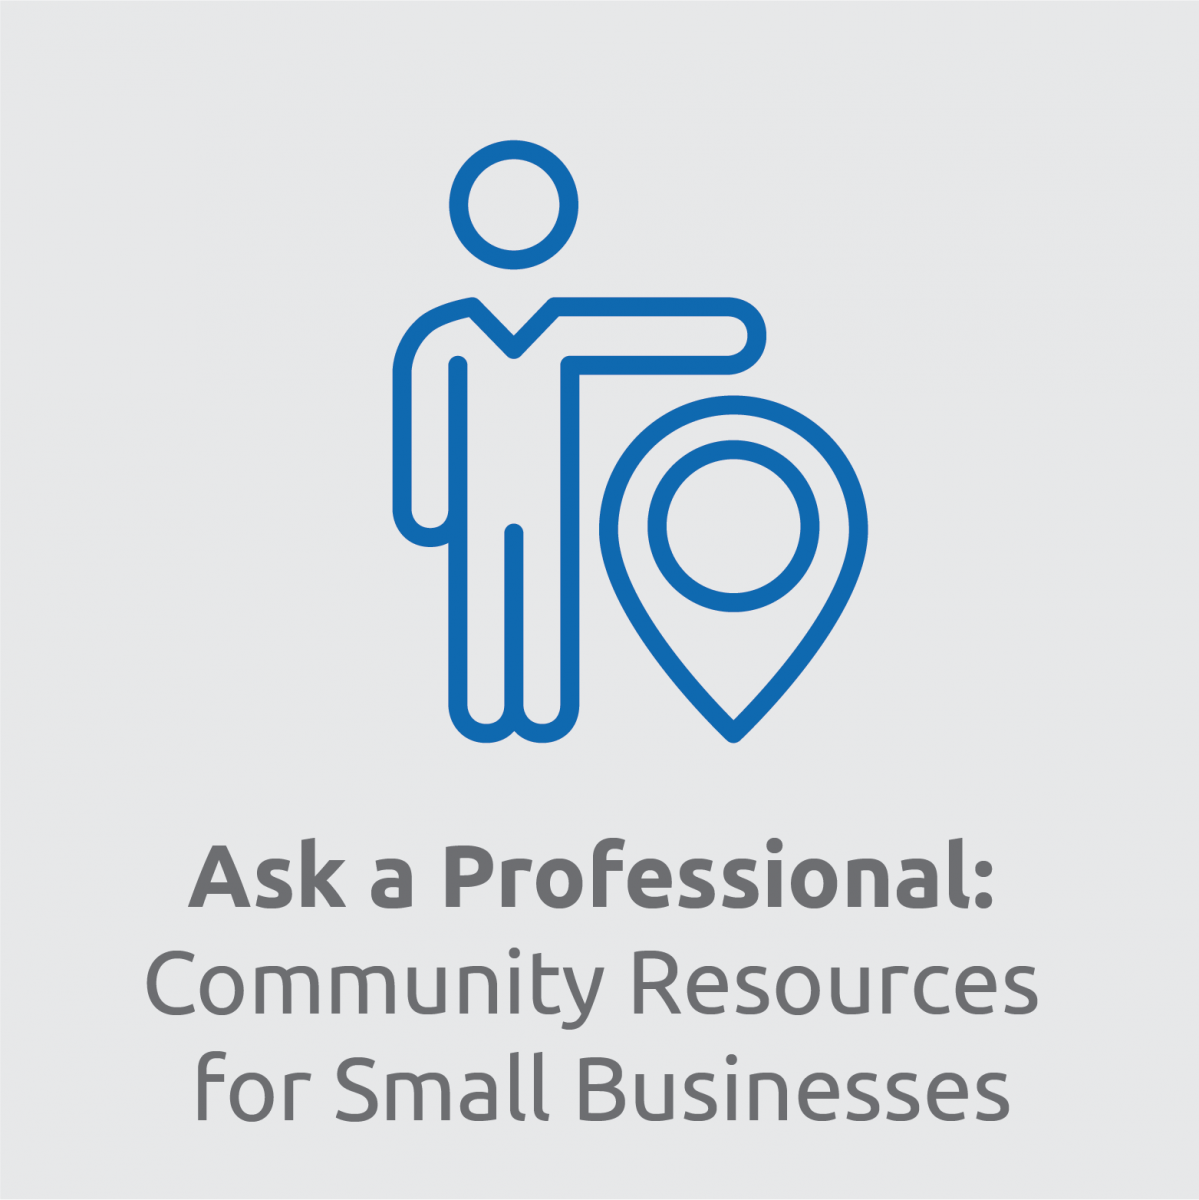 Community Resources for Small Businesses